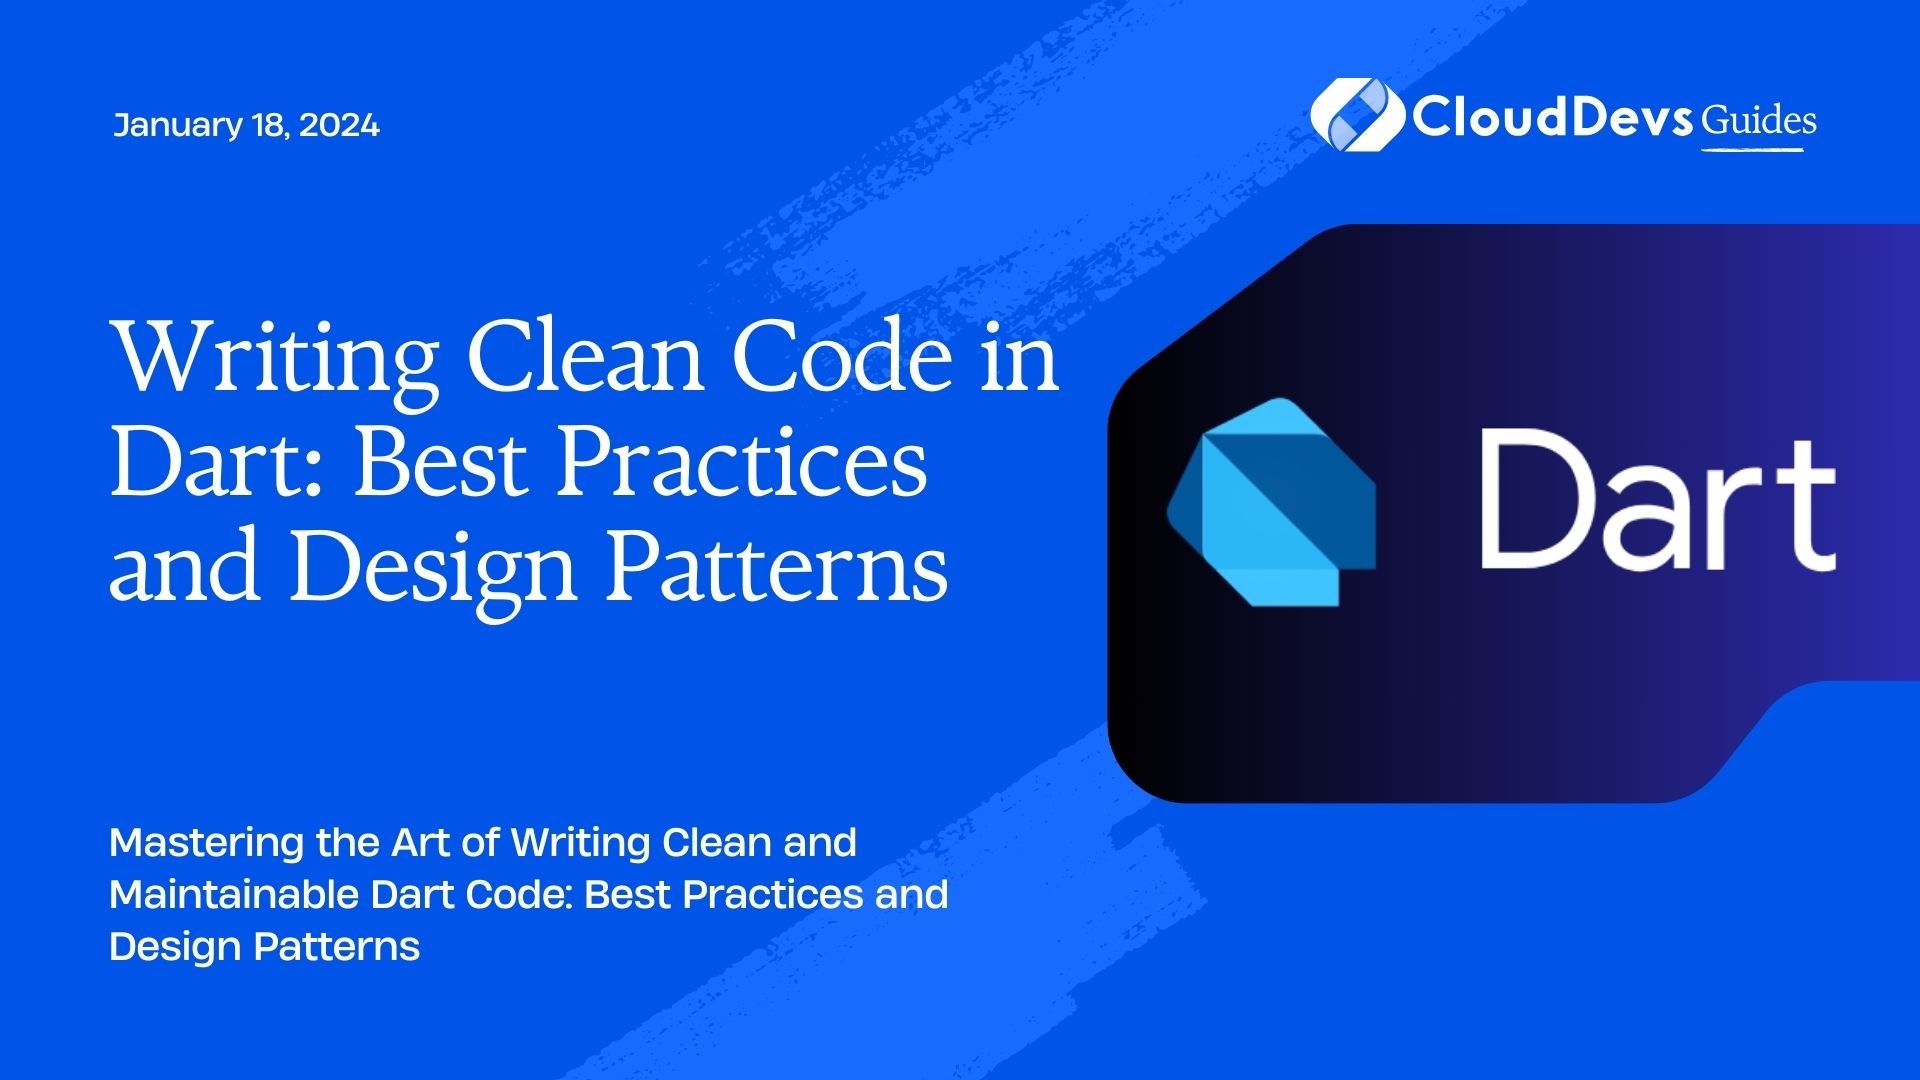 Writing Clean Code in Dart: Best Practices and Design Patterns